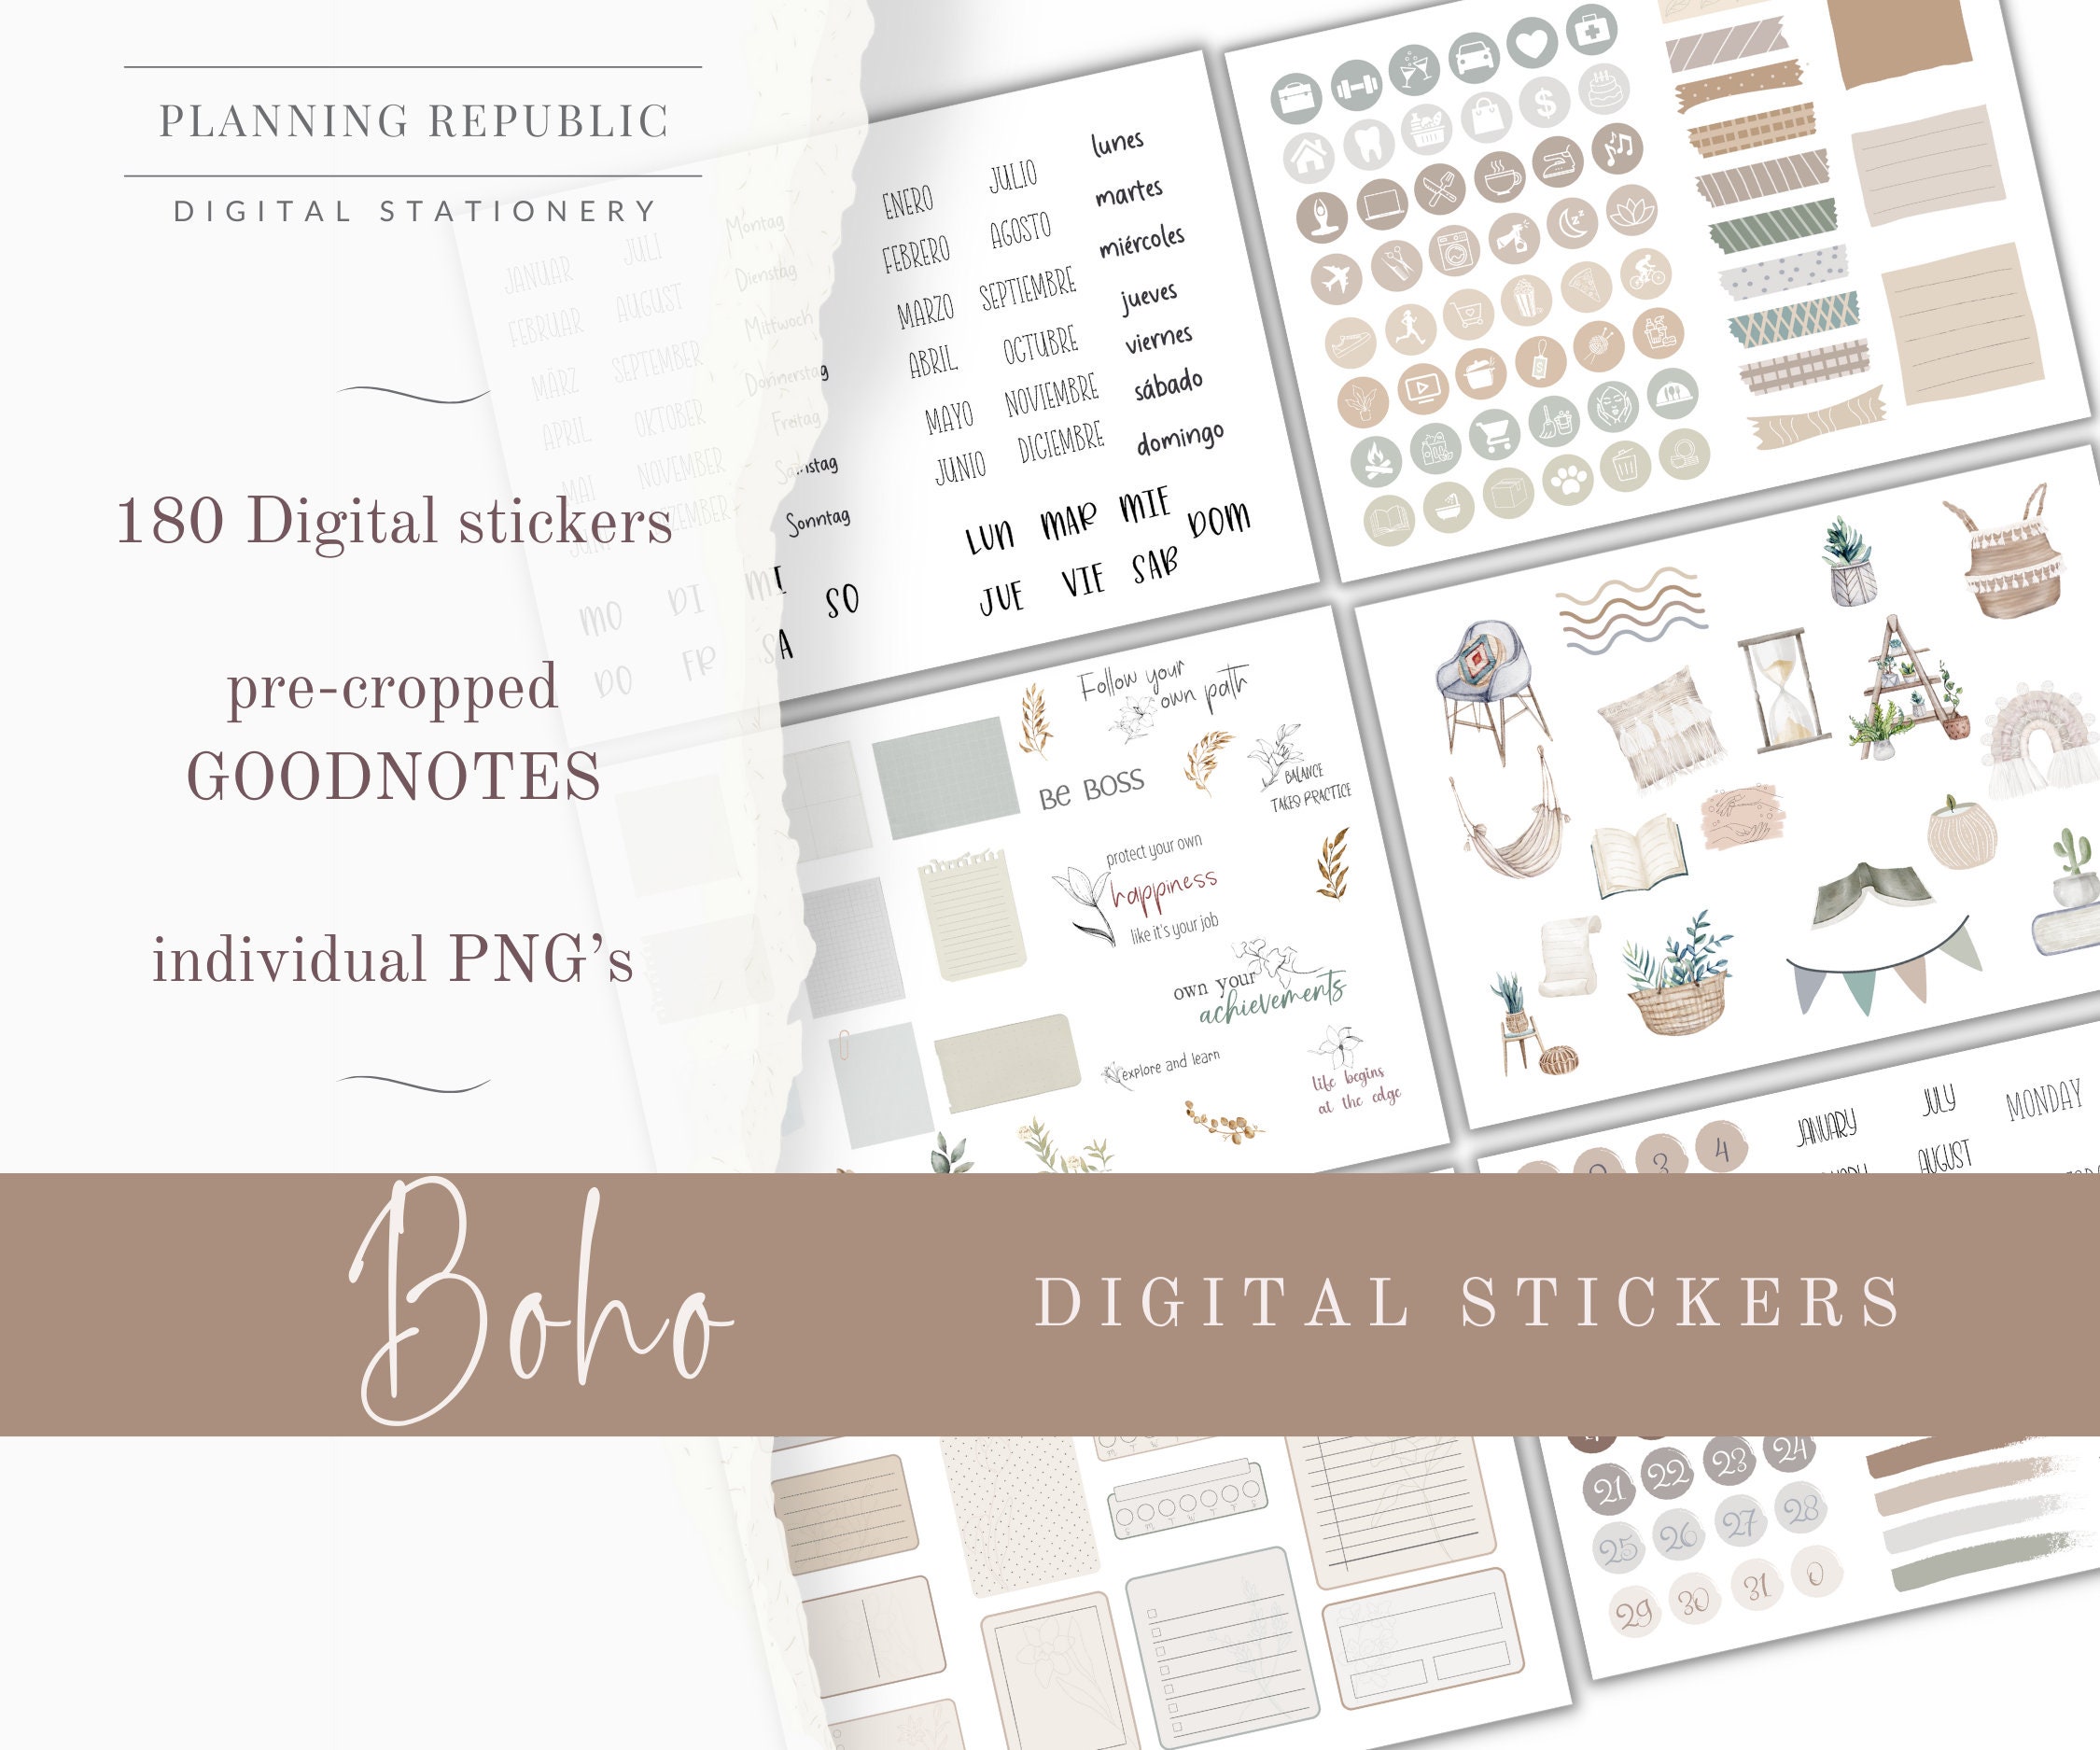 SEWING Digital Stickers for Goodnotes, Pre-cropped Digital Planner